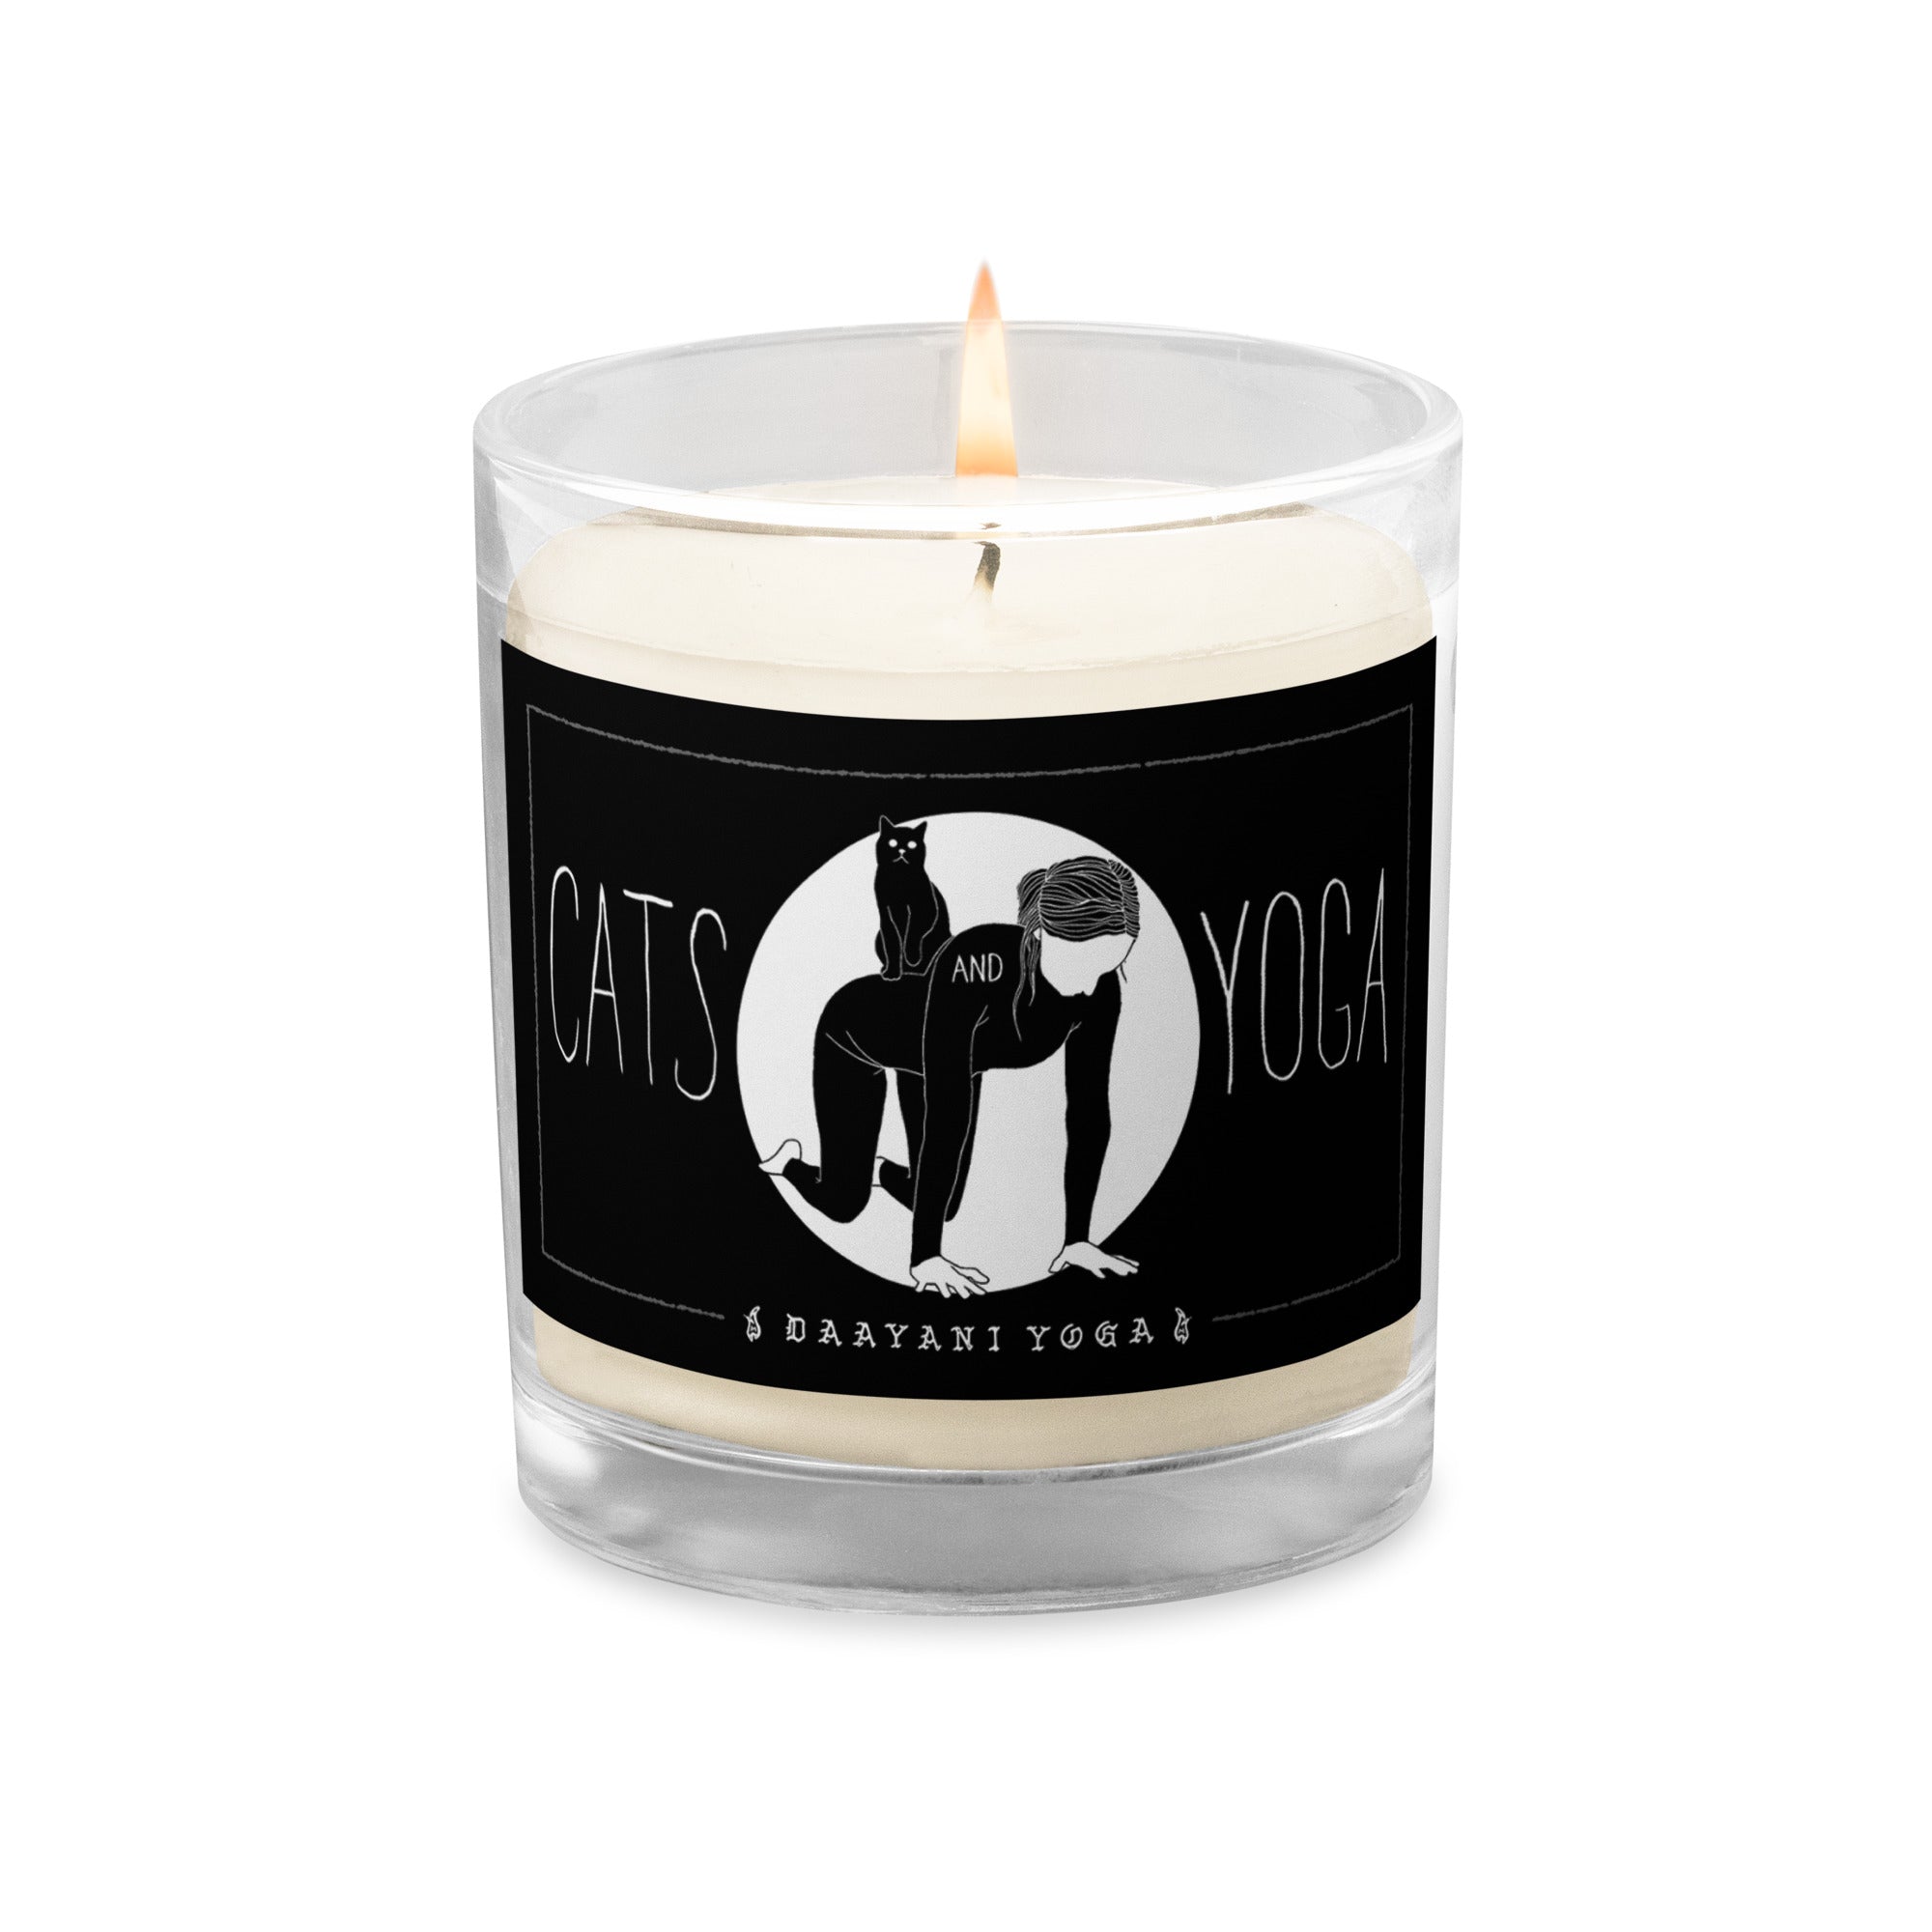 Cats & Yoga Soy Candle